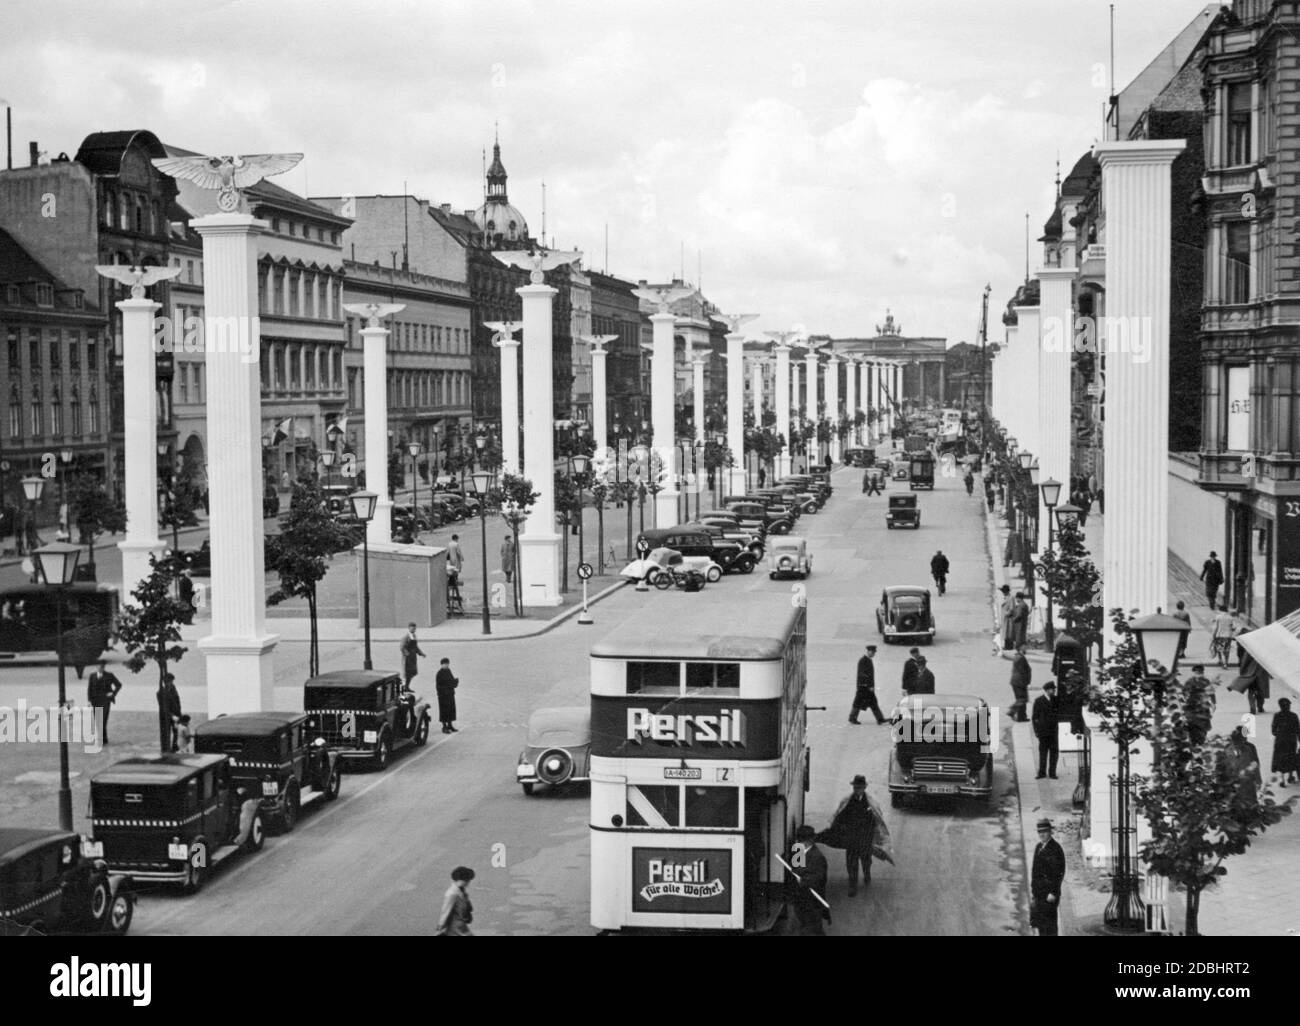 'Benito Mussolini visited Germany between September 25 and 29, 1937. The picture shows the street Unter den Linden in Berlin, decorated with flags and Nazi symbols for the visit. A double-decker bus stops in front to pick up passengers. Advertising for the brand ''Persil - fuer alle Waesche''. In the background is the Brandenburg Gate.' Stock Photo